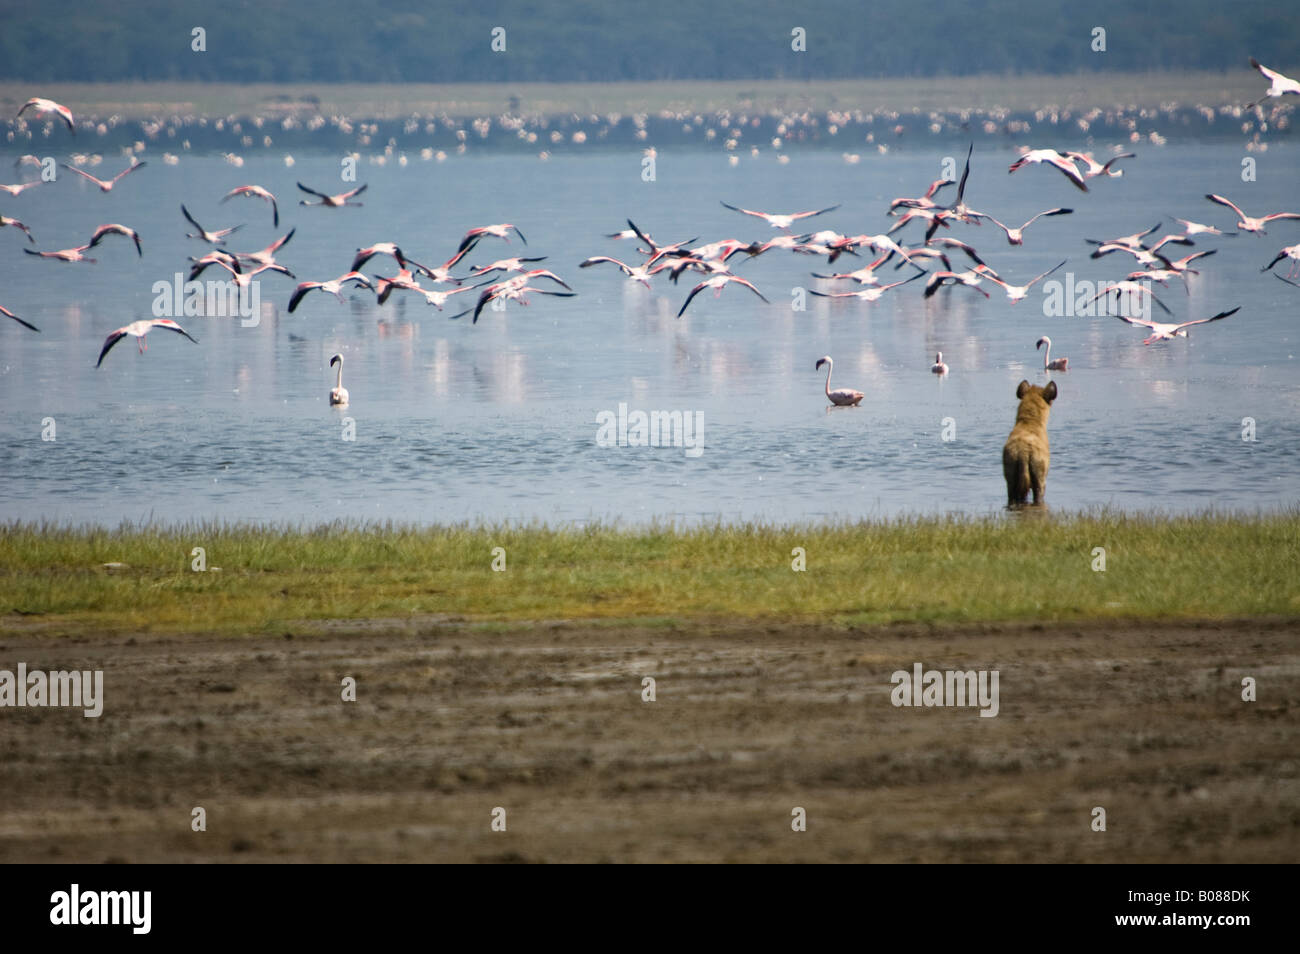 A spotted hyena looks on longingly as a flock of flamingos fly off into the distance Stock Photo